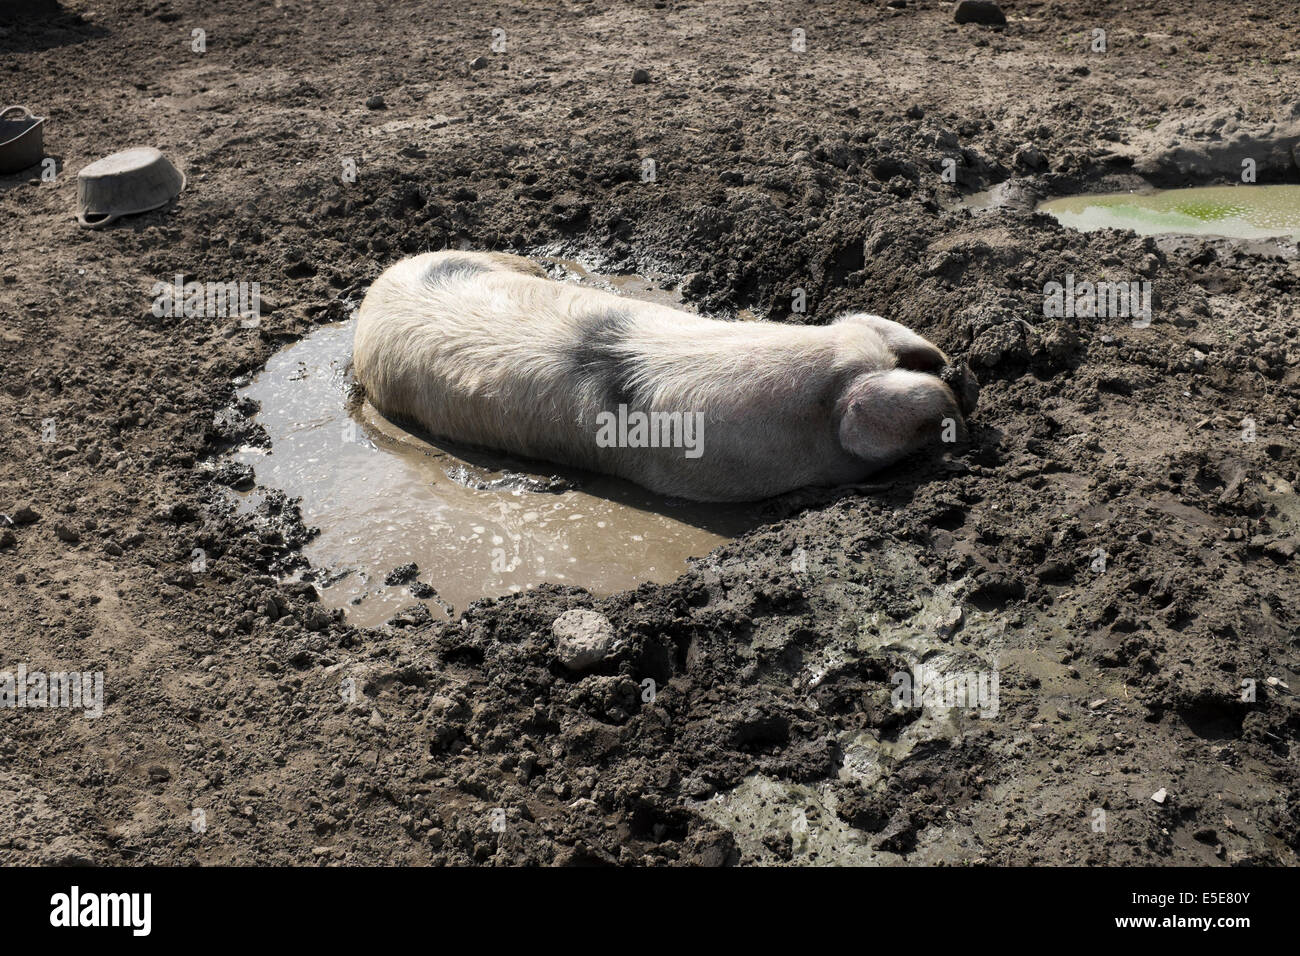 Pig cooling off in pool of muddy water in sty Stock Photo